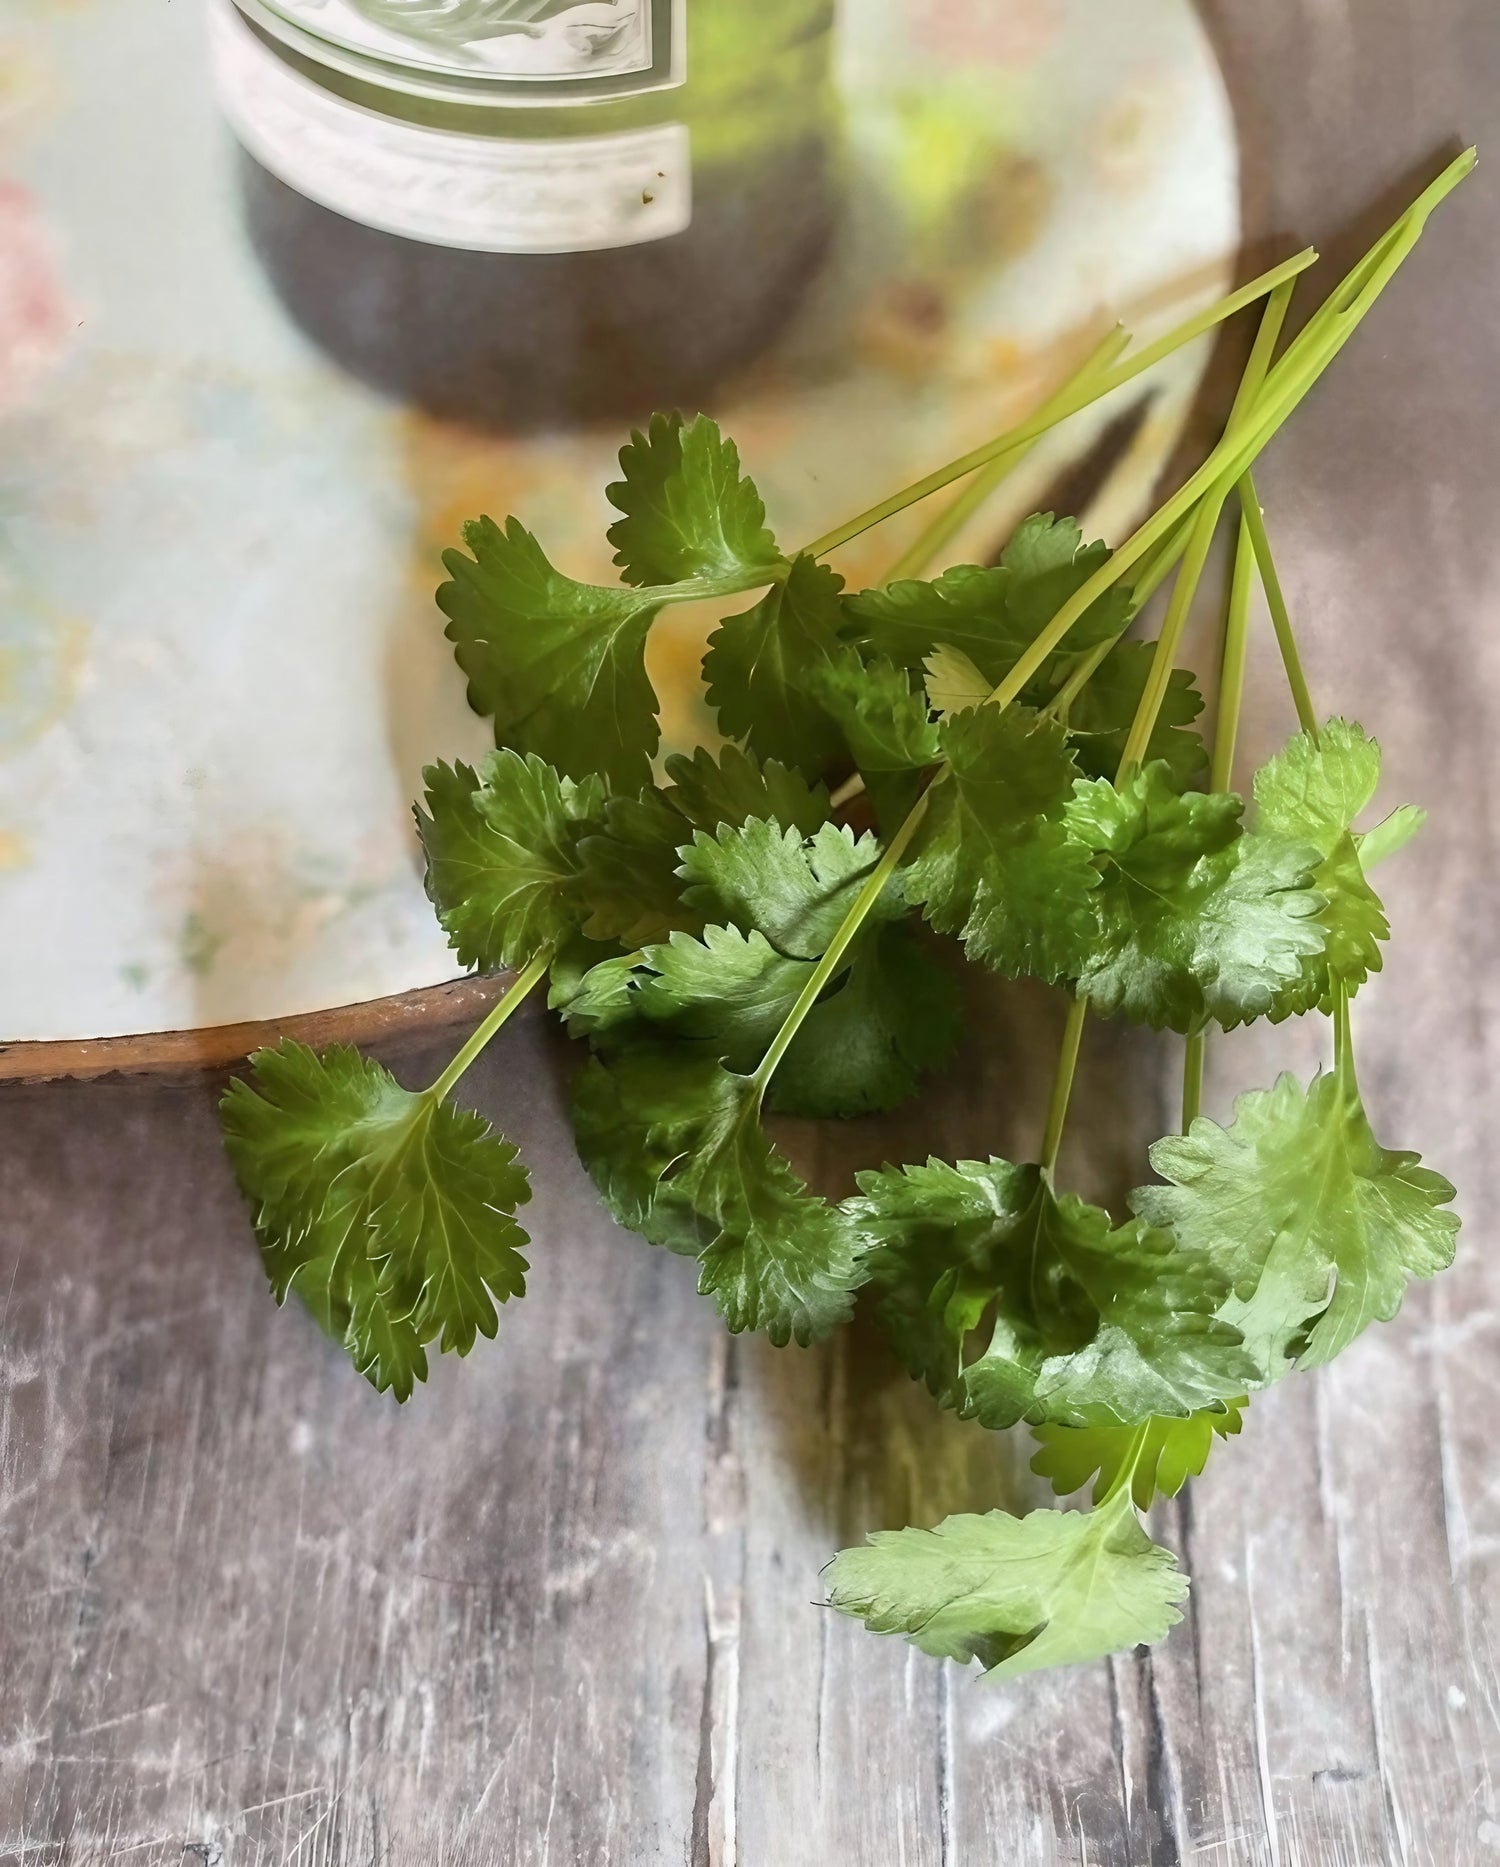 Fresh coriander leaves arranged neatly on a plate